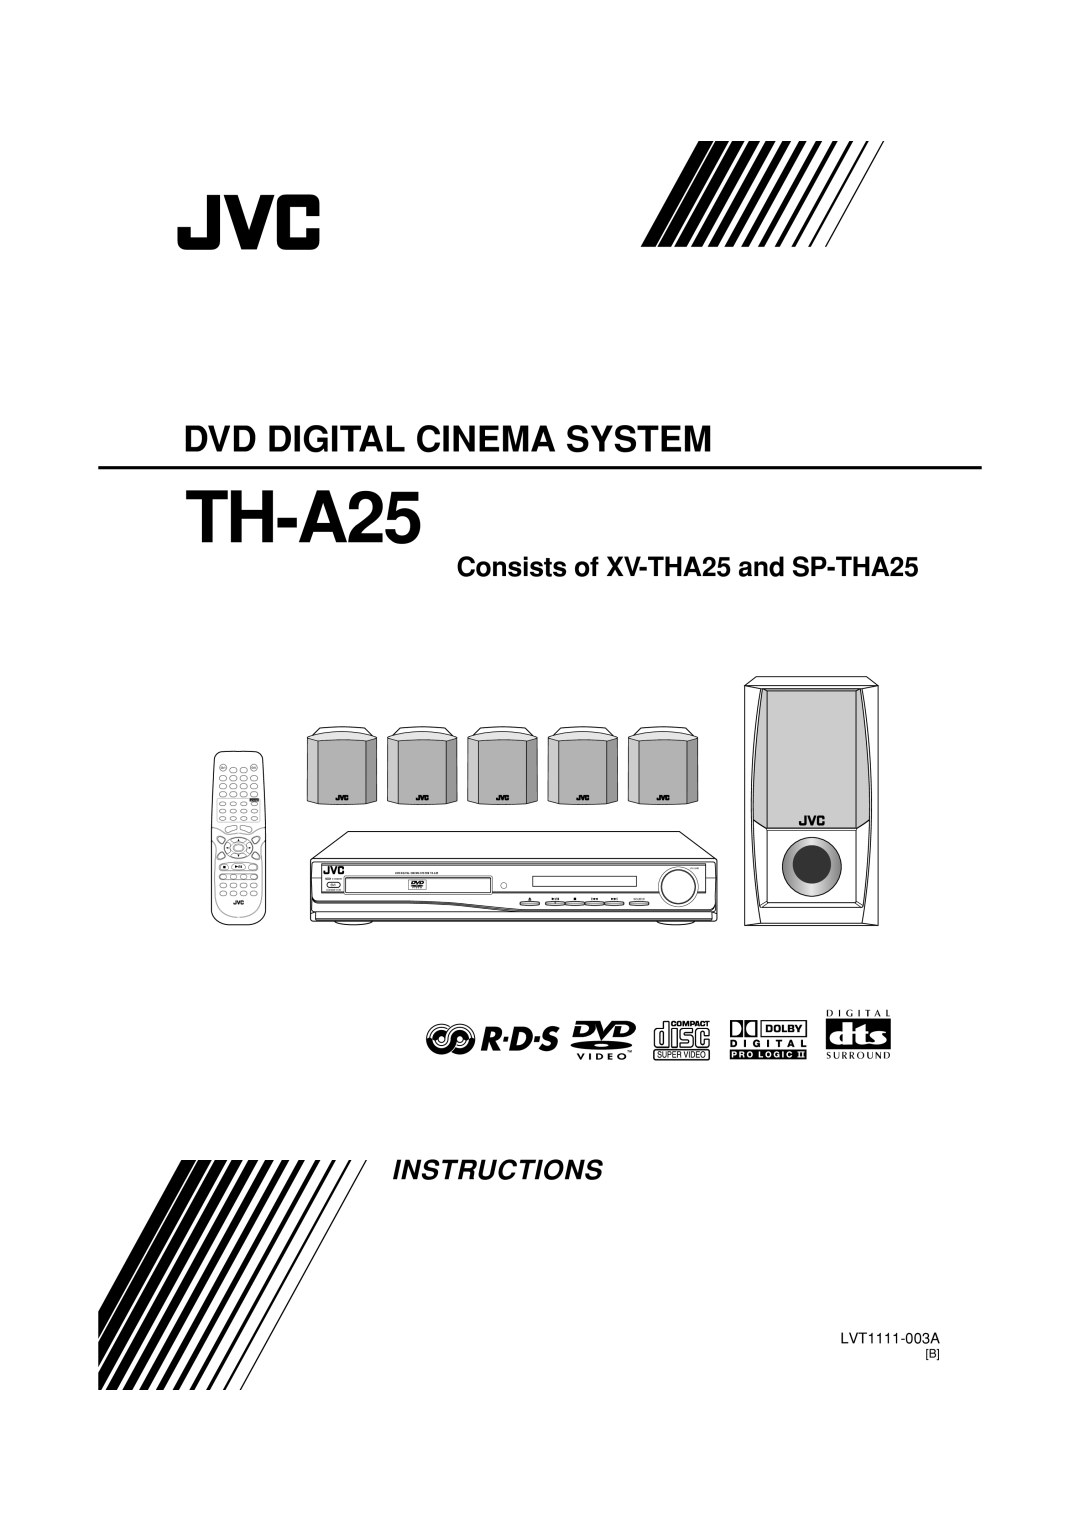 JVC TH-A25 manual Instructions, Dvd Digital Theater System, Consists of XV-THA25and SP-THA25, LVT1111-001B, Source, Sound 